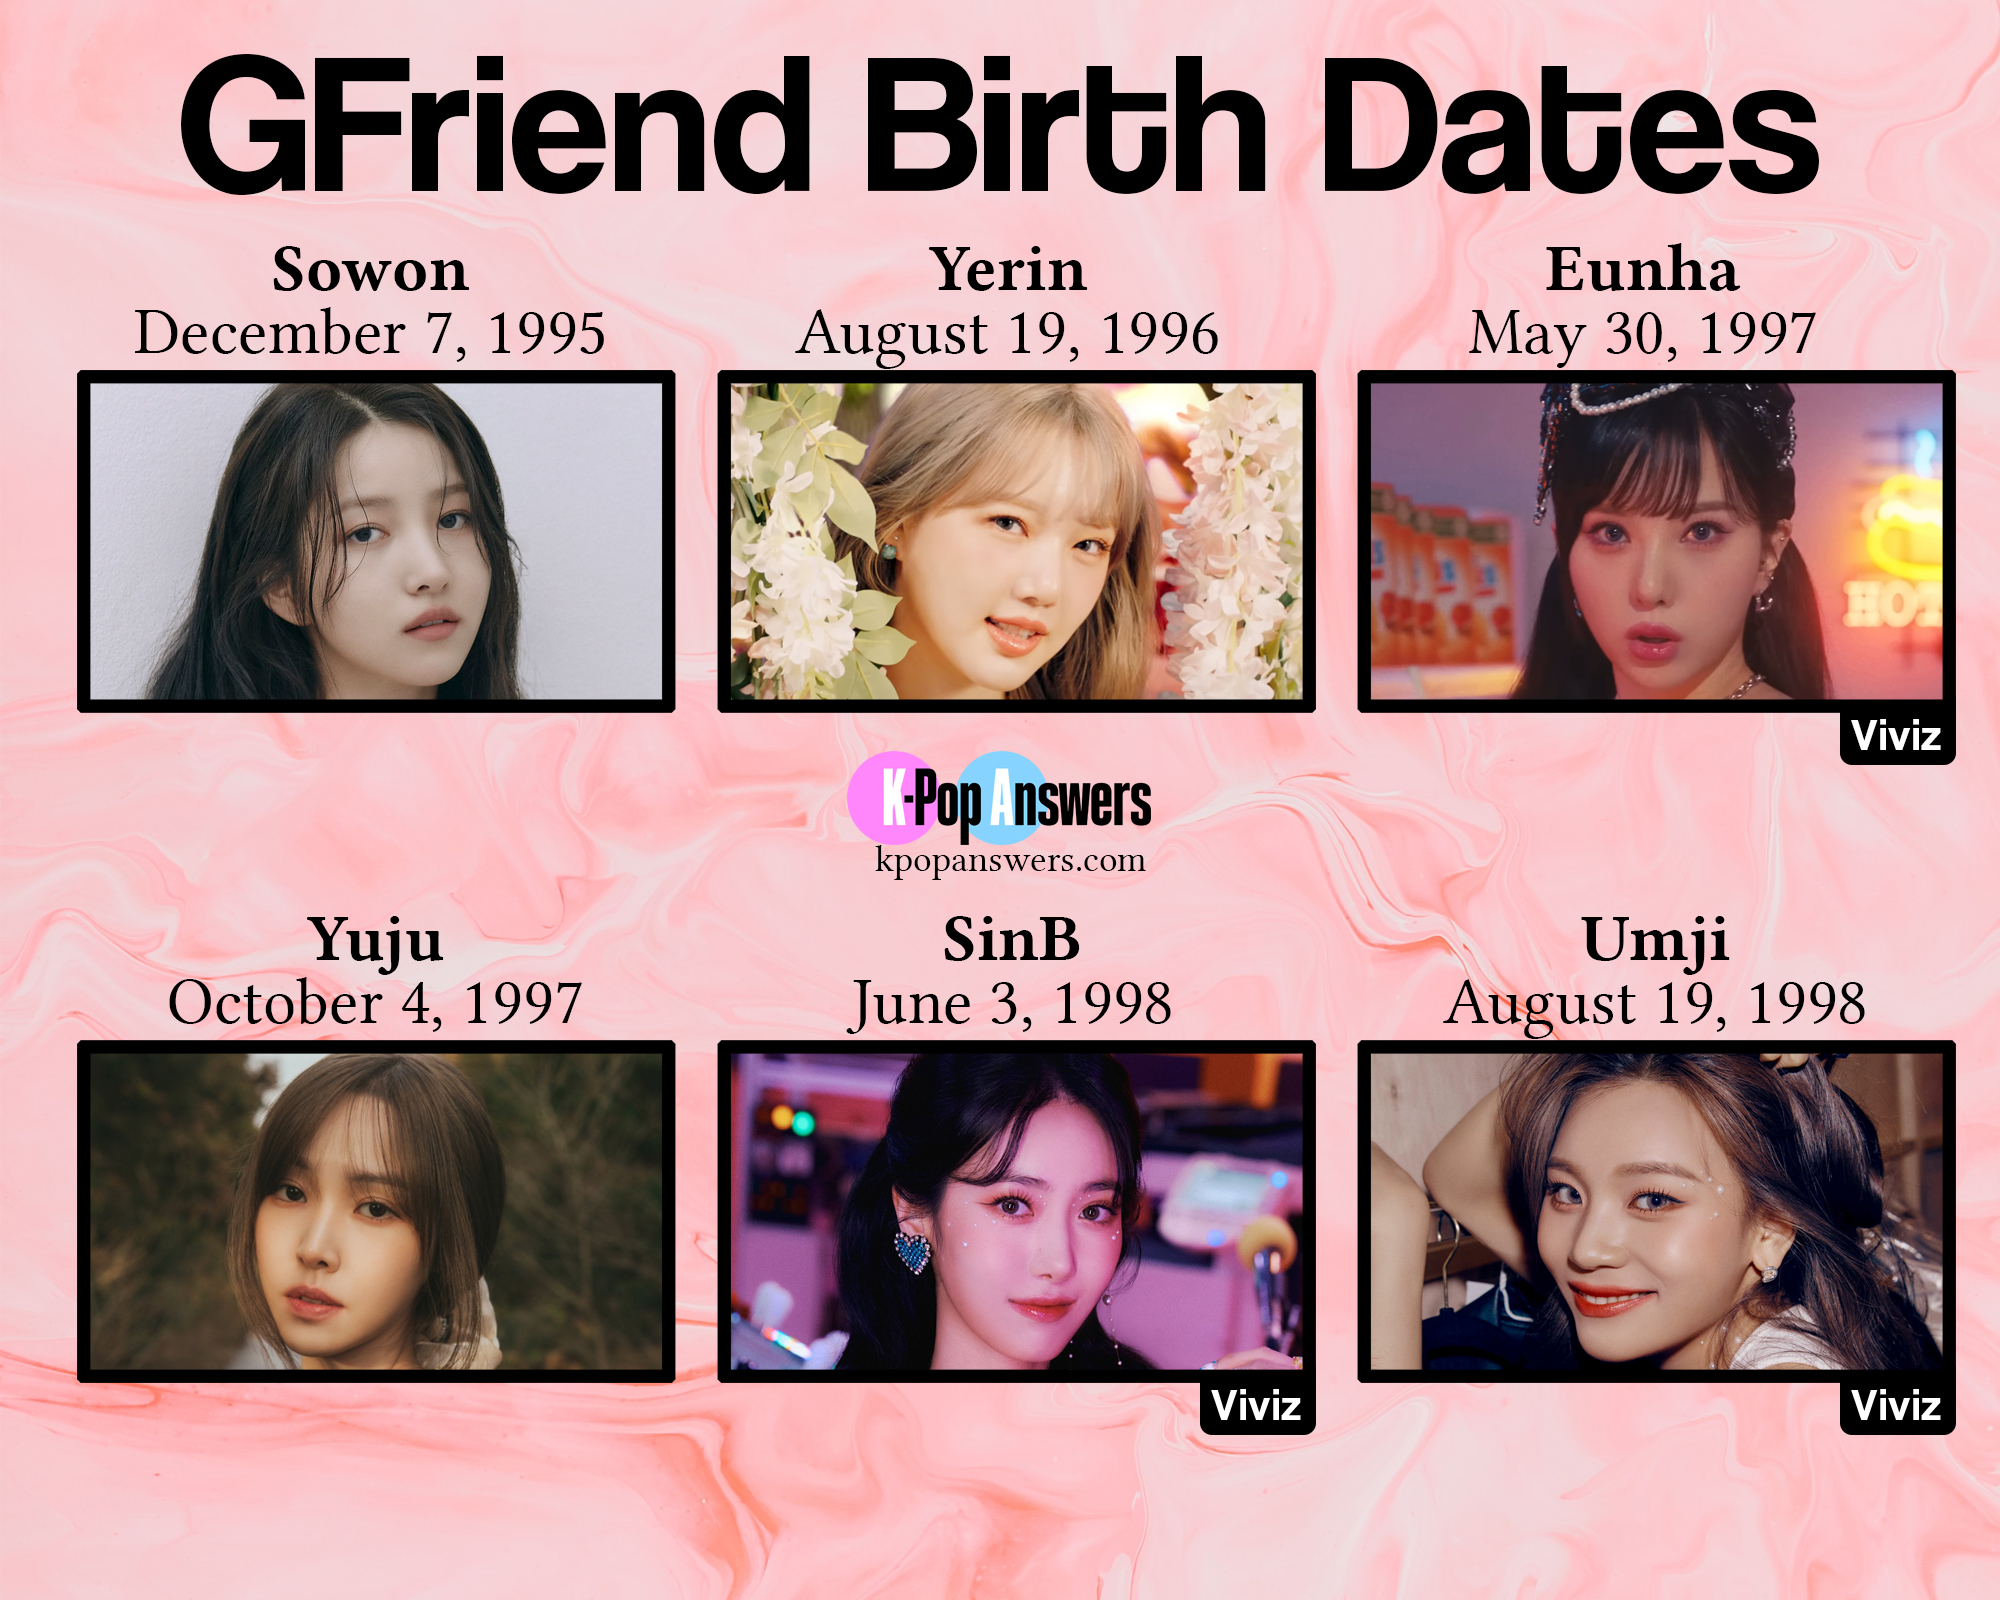 How Old Are the GFriend & Viviz Members?